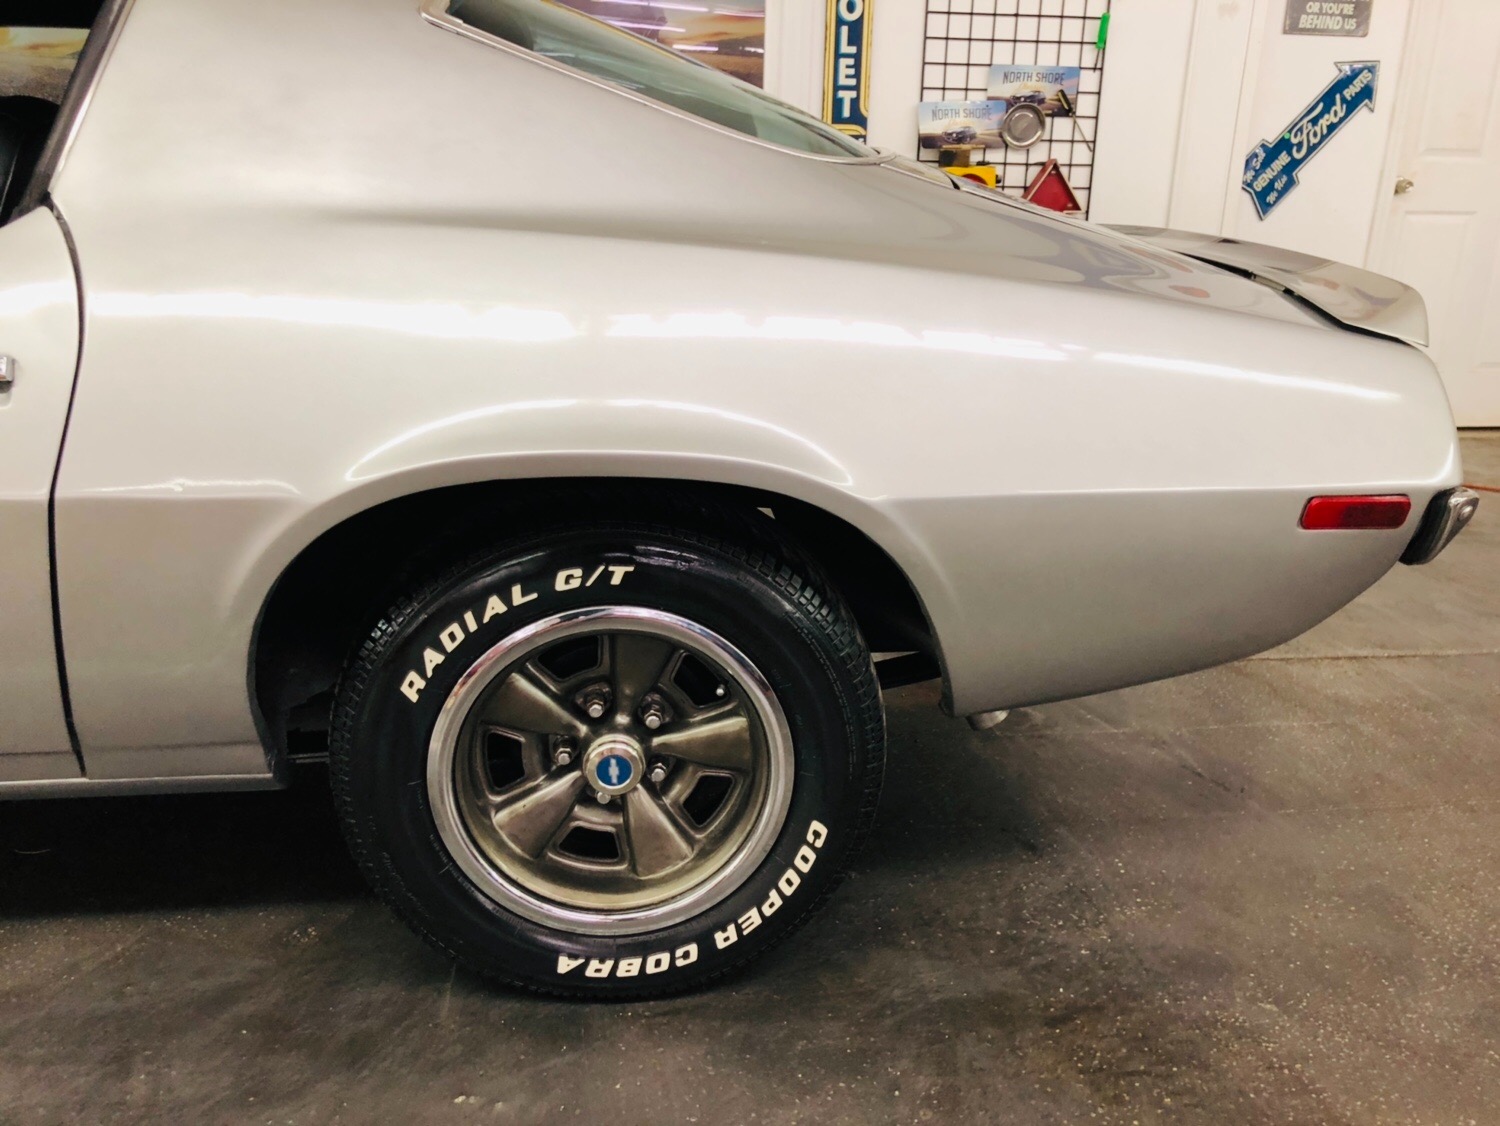 Used 1972 Chevrolet Camaro - SS TRIBUTE - 383 STROKER ENGINE - 700R4 TRANS - SEE VIDEO - | Mundelein, IL